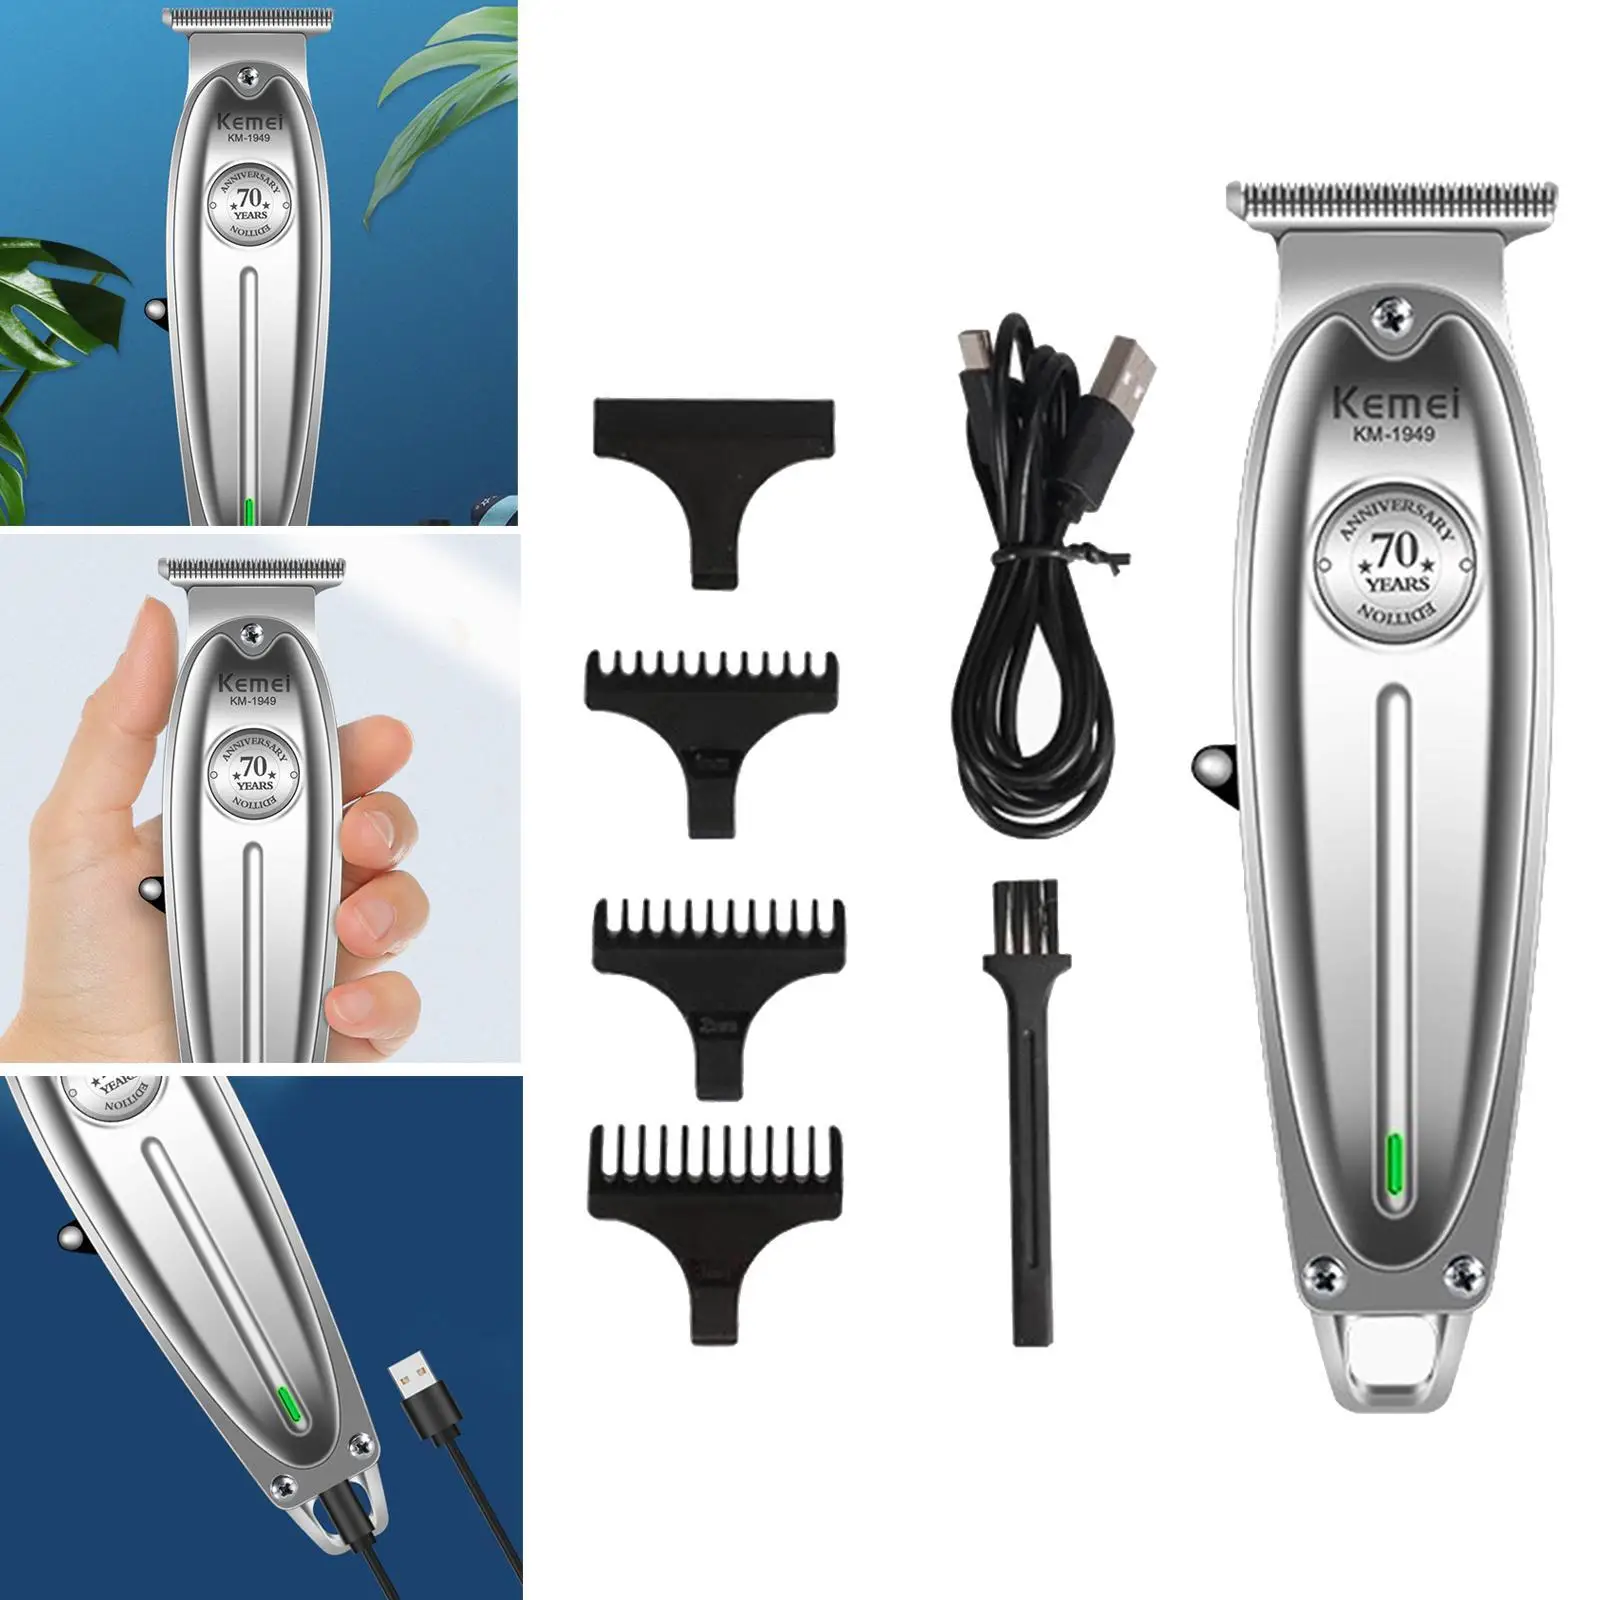 All Metal Electric USB Boys Men`s Hair Clippers Kit Trimmer with Guide Combs